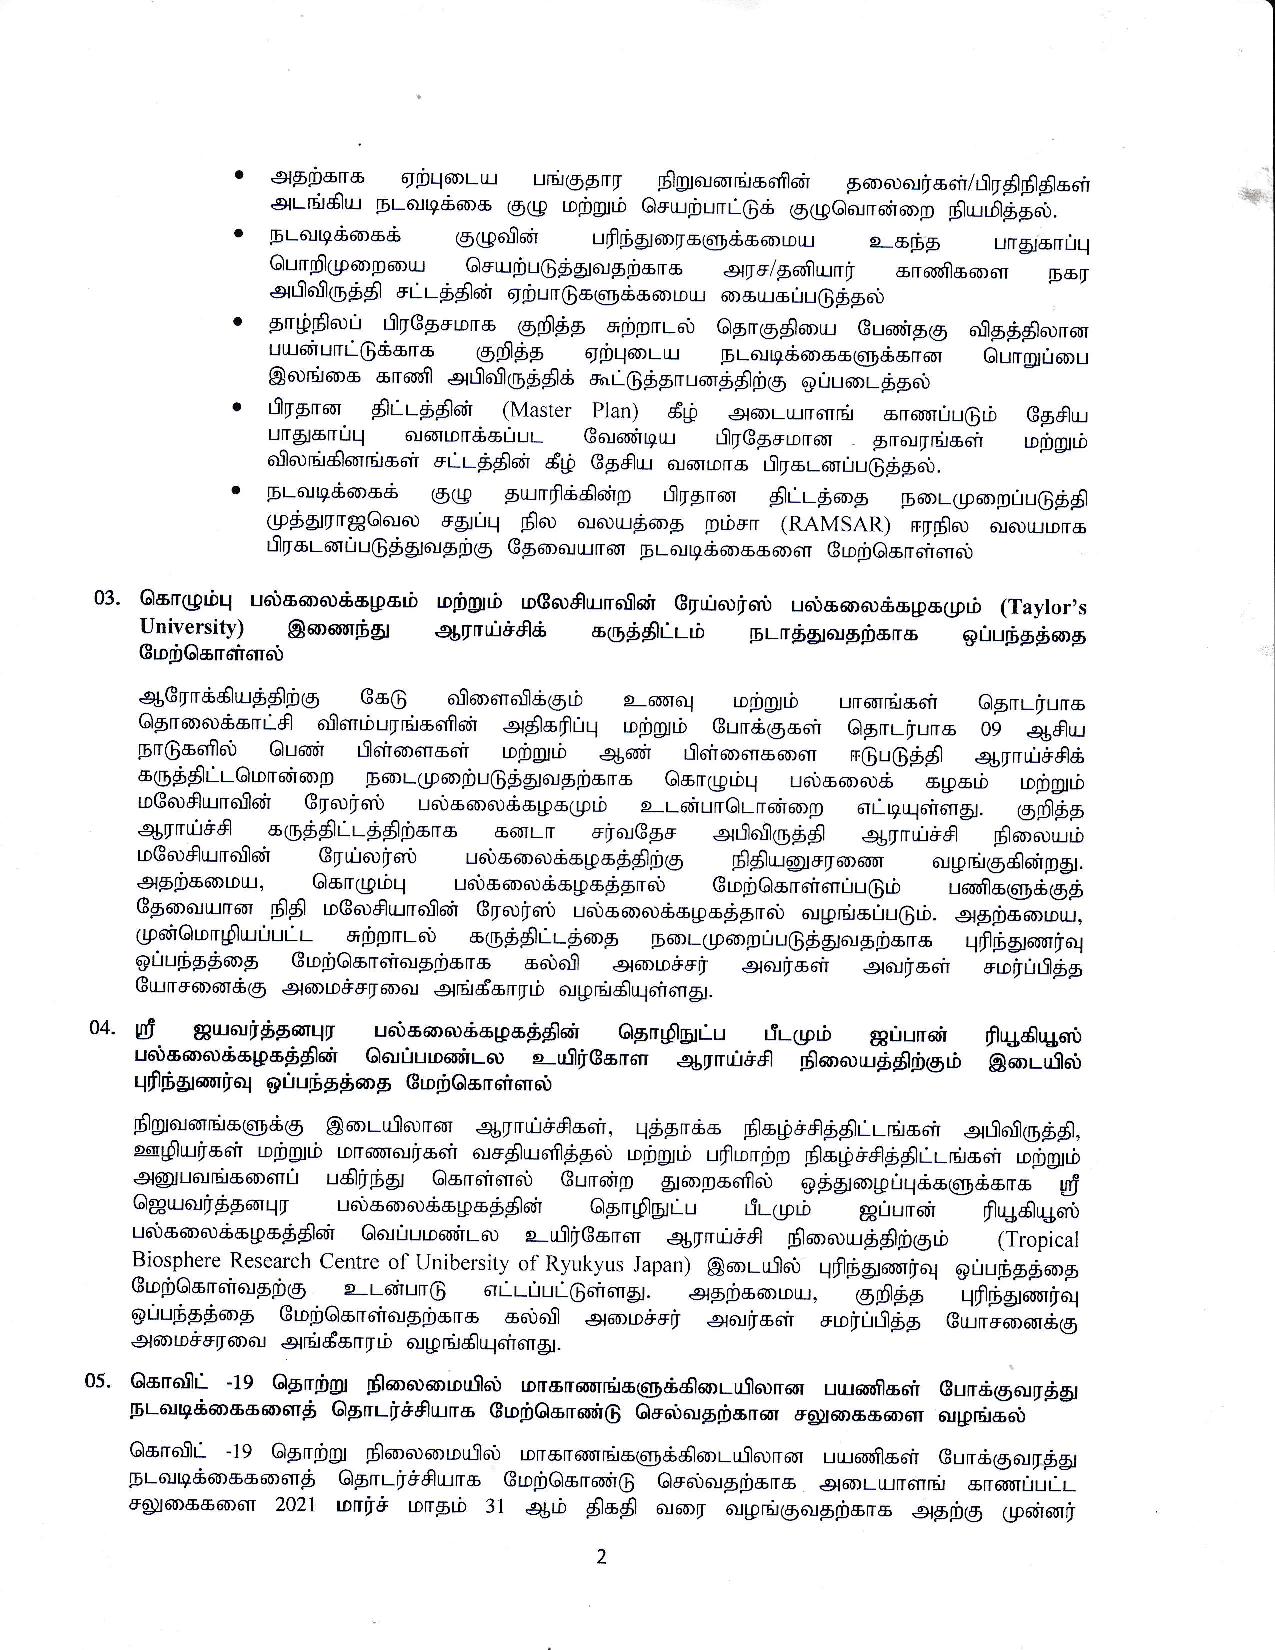 Cabinet Decision on 10.05.2021 Tamil page 002